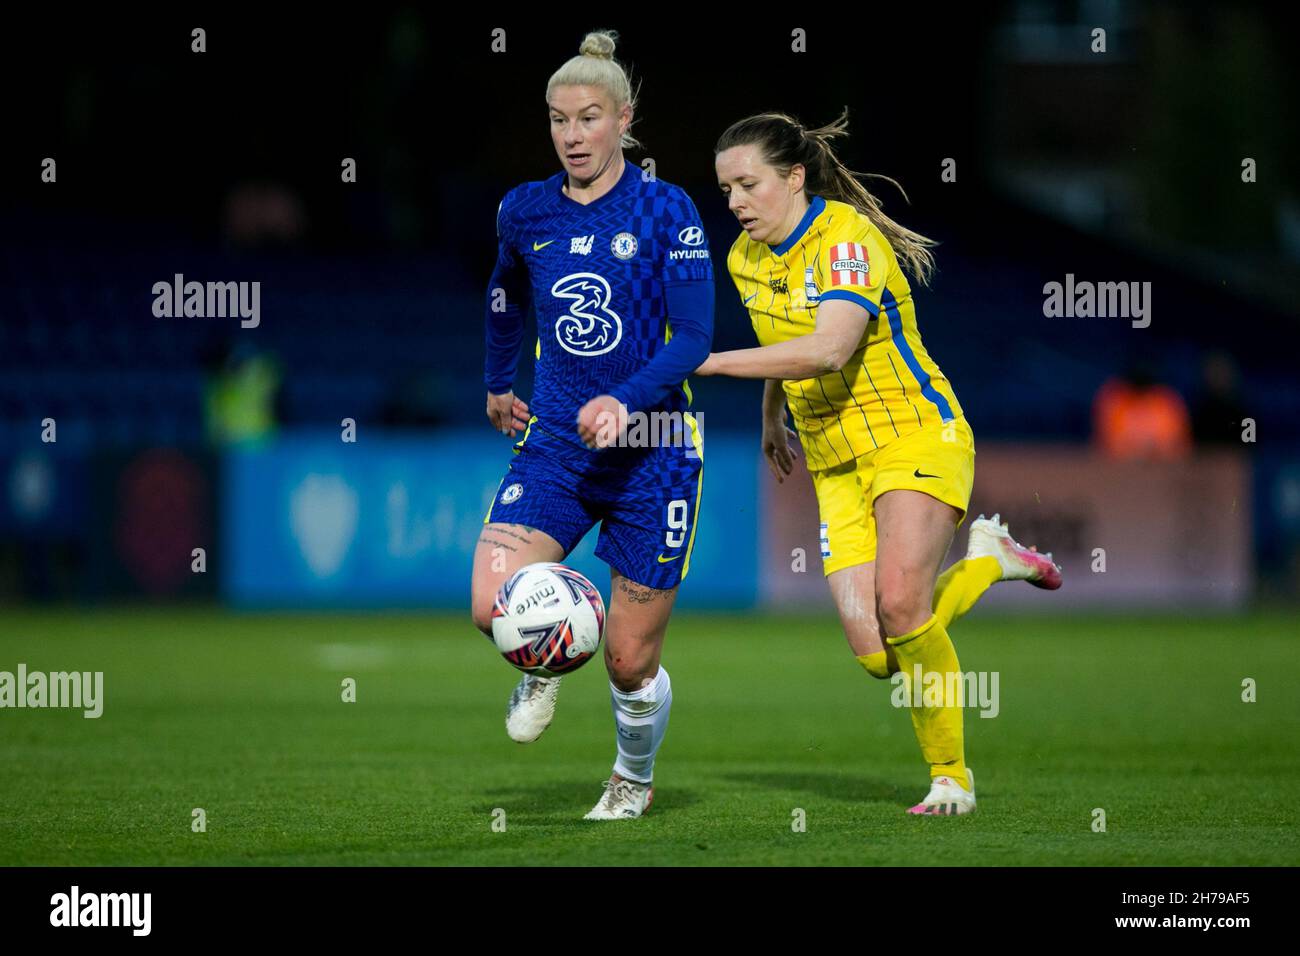 London, UK. 21st Nov, 2021. LONDON, UK. NOVEMBER 21ST : Bethany England of Chelsea FC controls the ball during the 2021-22 FA Womens Superleague fixture between Chelsea FC and Birmingham City at Kingsmeadow. Credit: Federico Guerra Morán/Alamy Live News Stock Photo